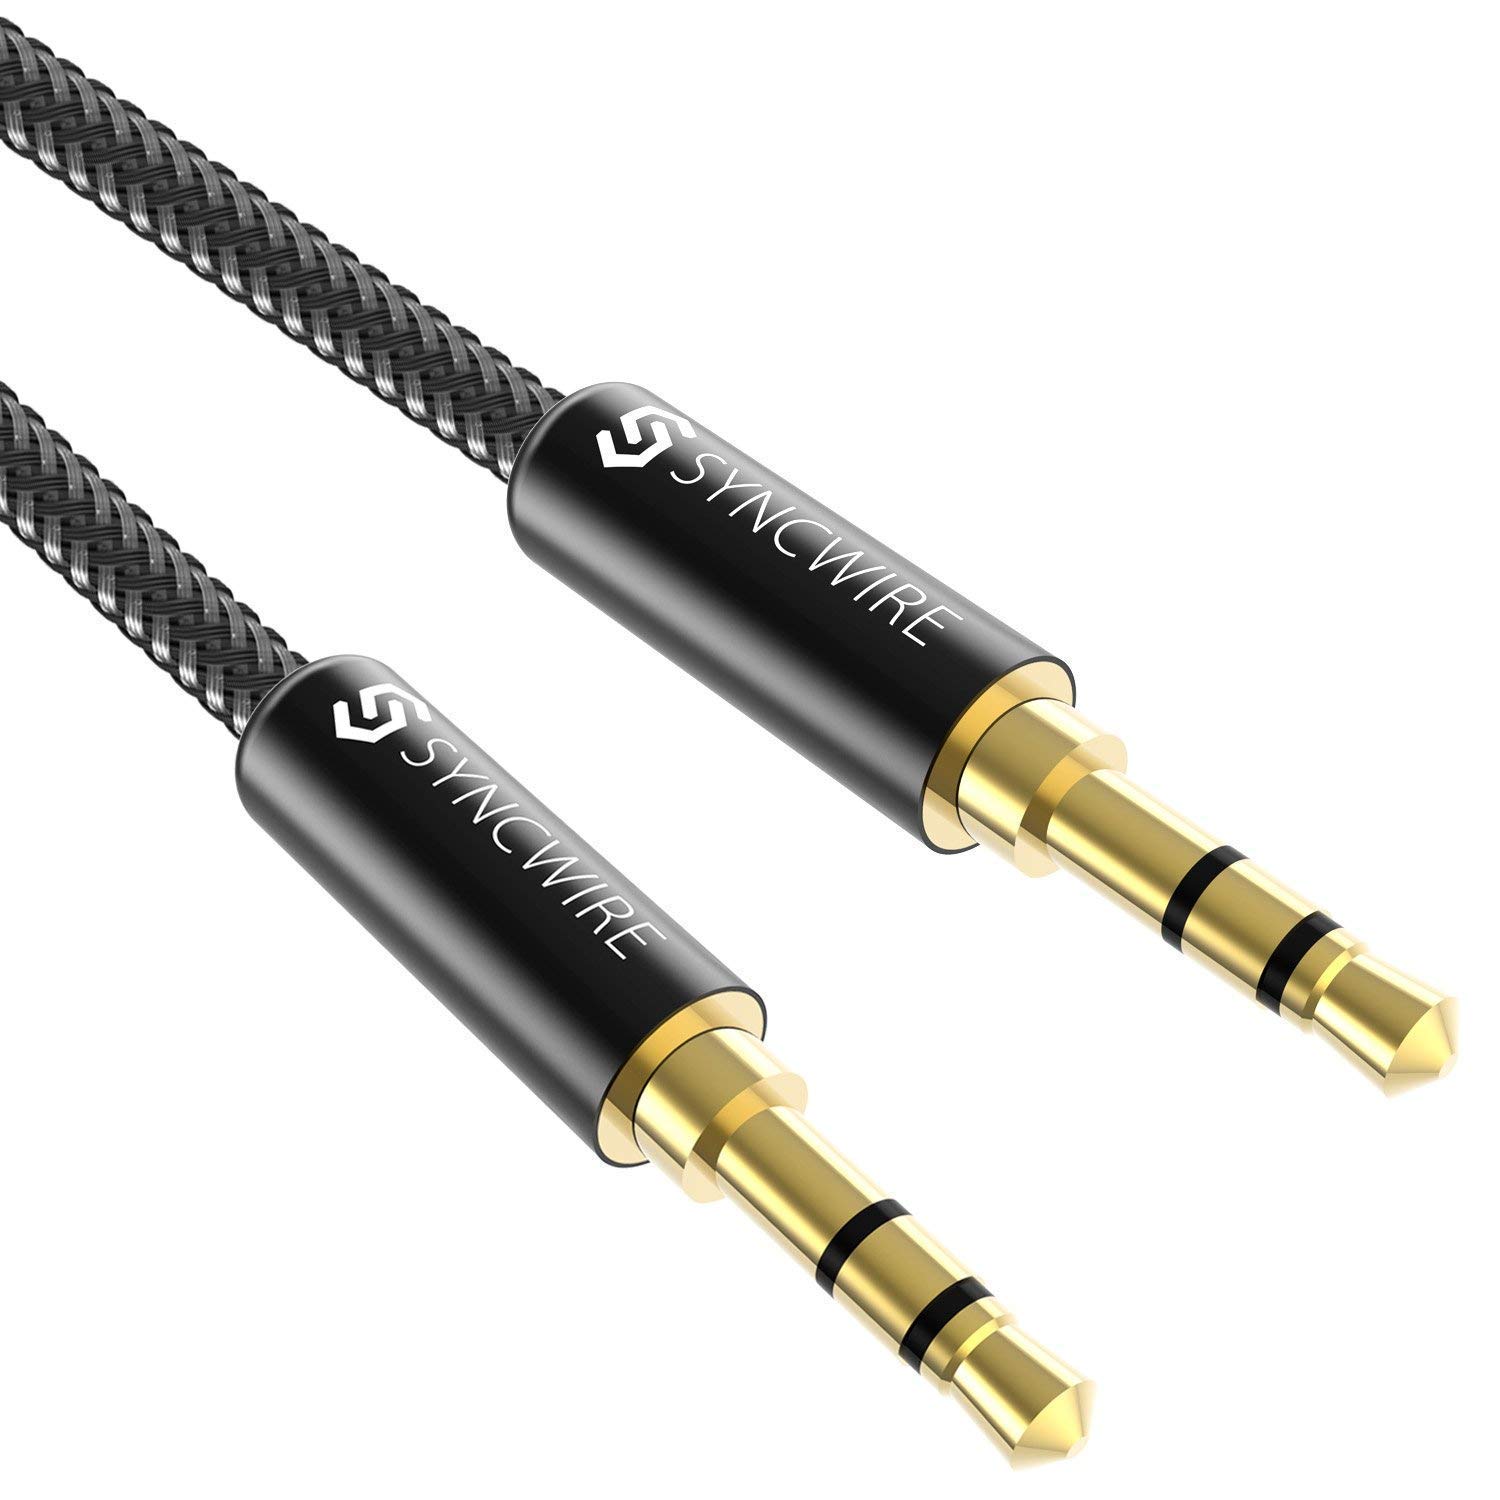 Syncwire 3.5mm Nylon Auxilllary Audio Cable, 3.3-Foot